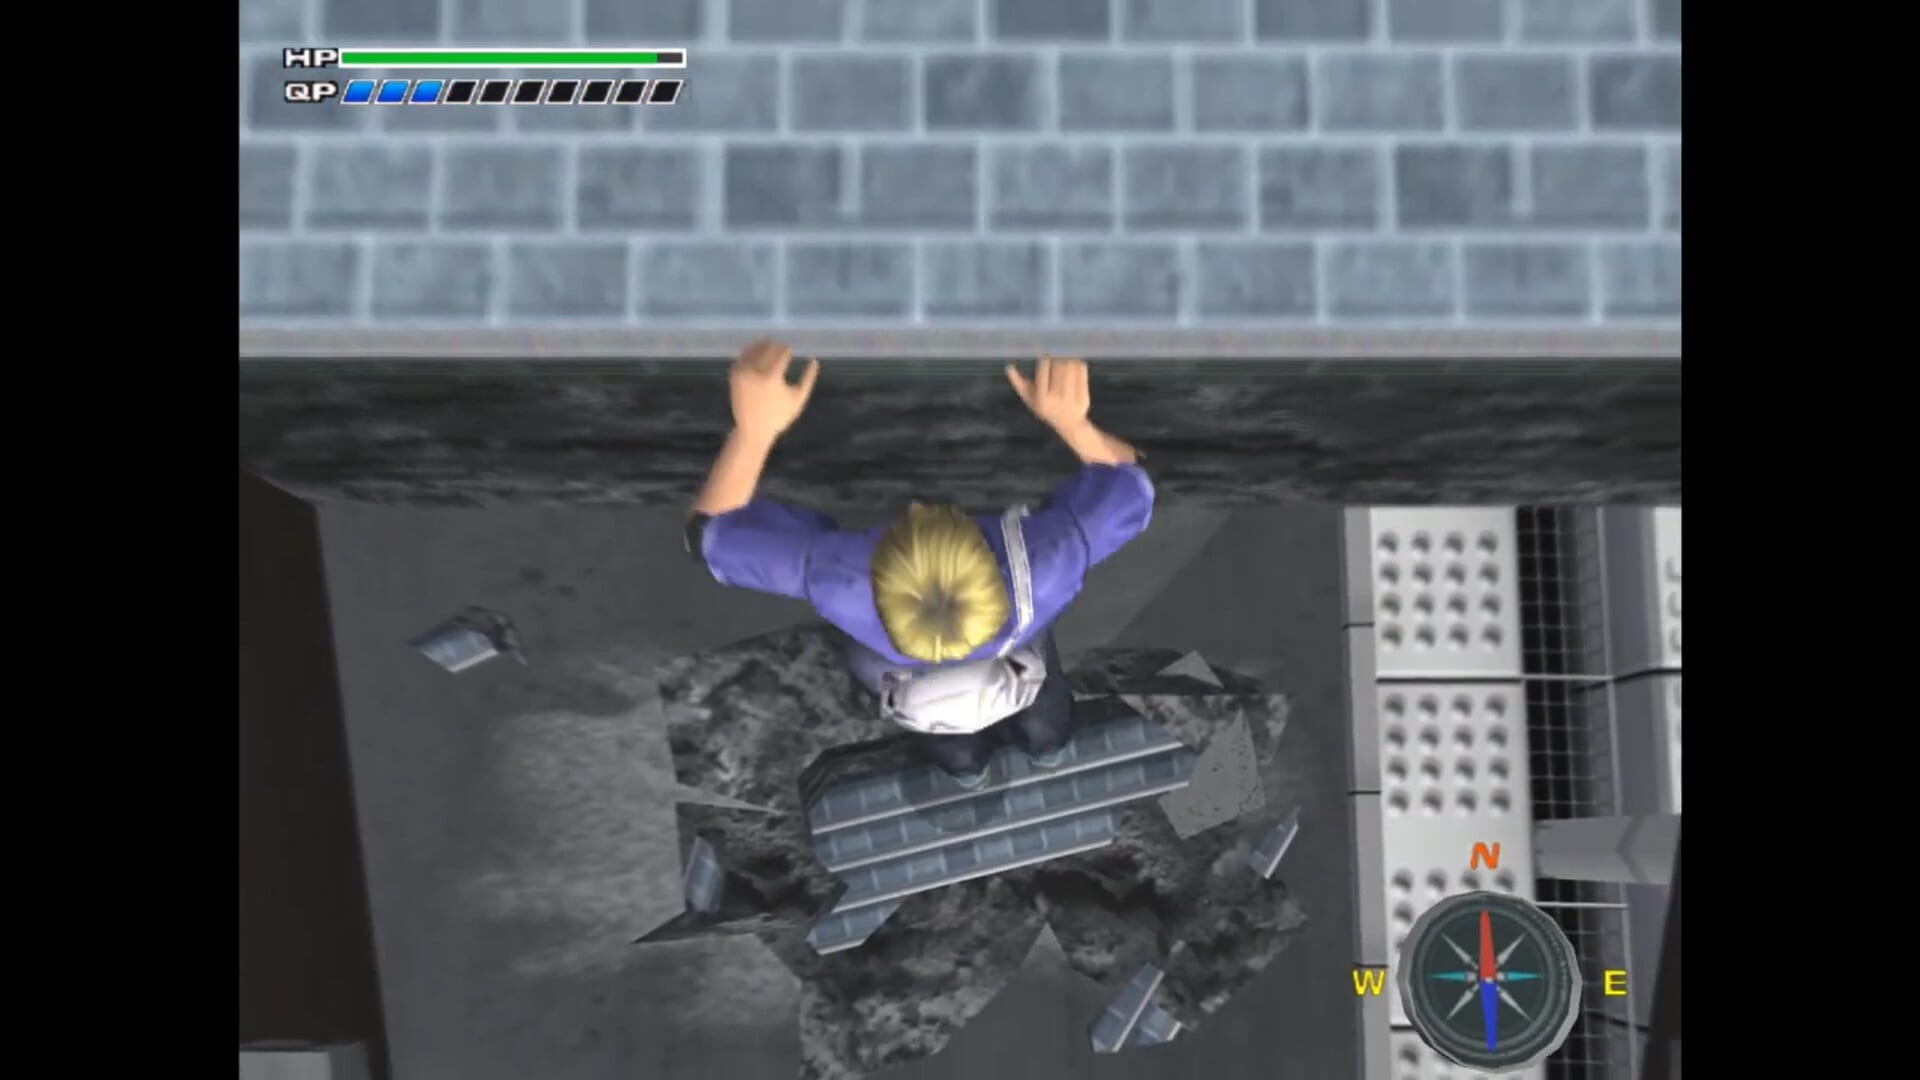 disaster report - a man clings to a broken bridge above a long fall